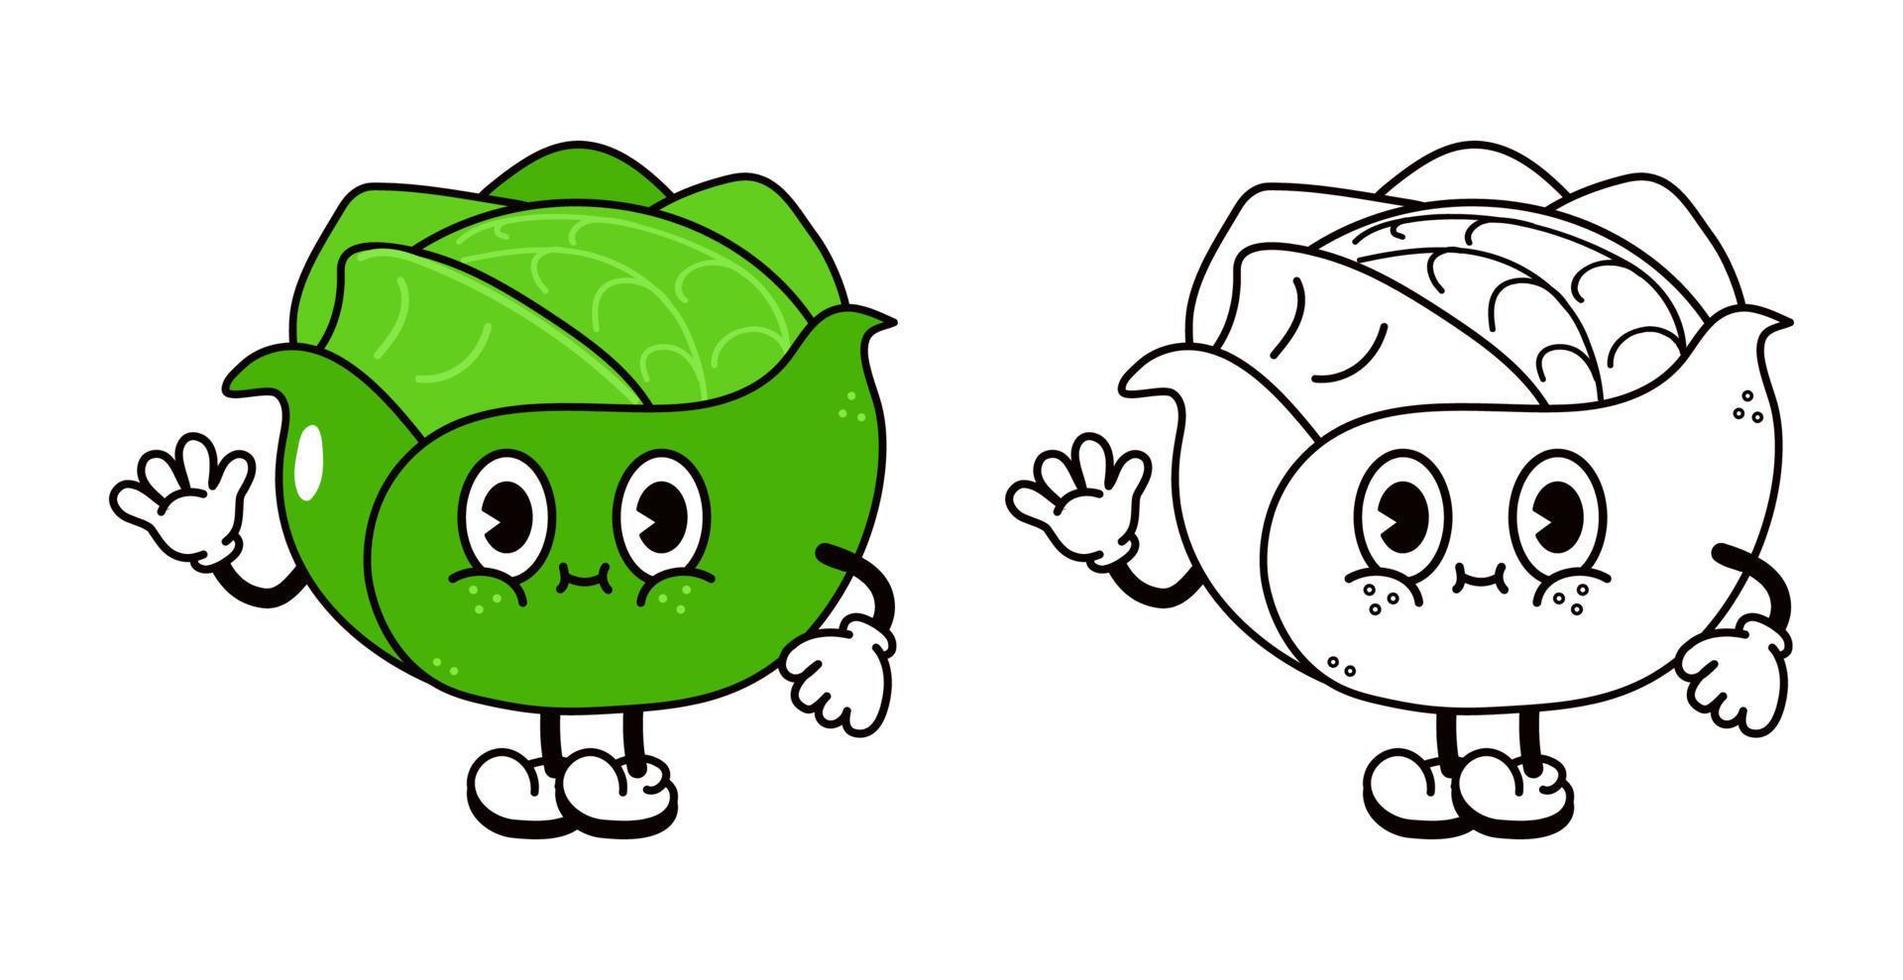 Cute funny cabbage waving hand character outline cartoon illustration for coloring book. Vector hand drawn traditional cartoon vintage, retro, cabbage character. Isolated on white background